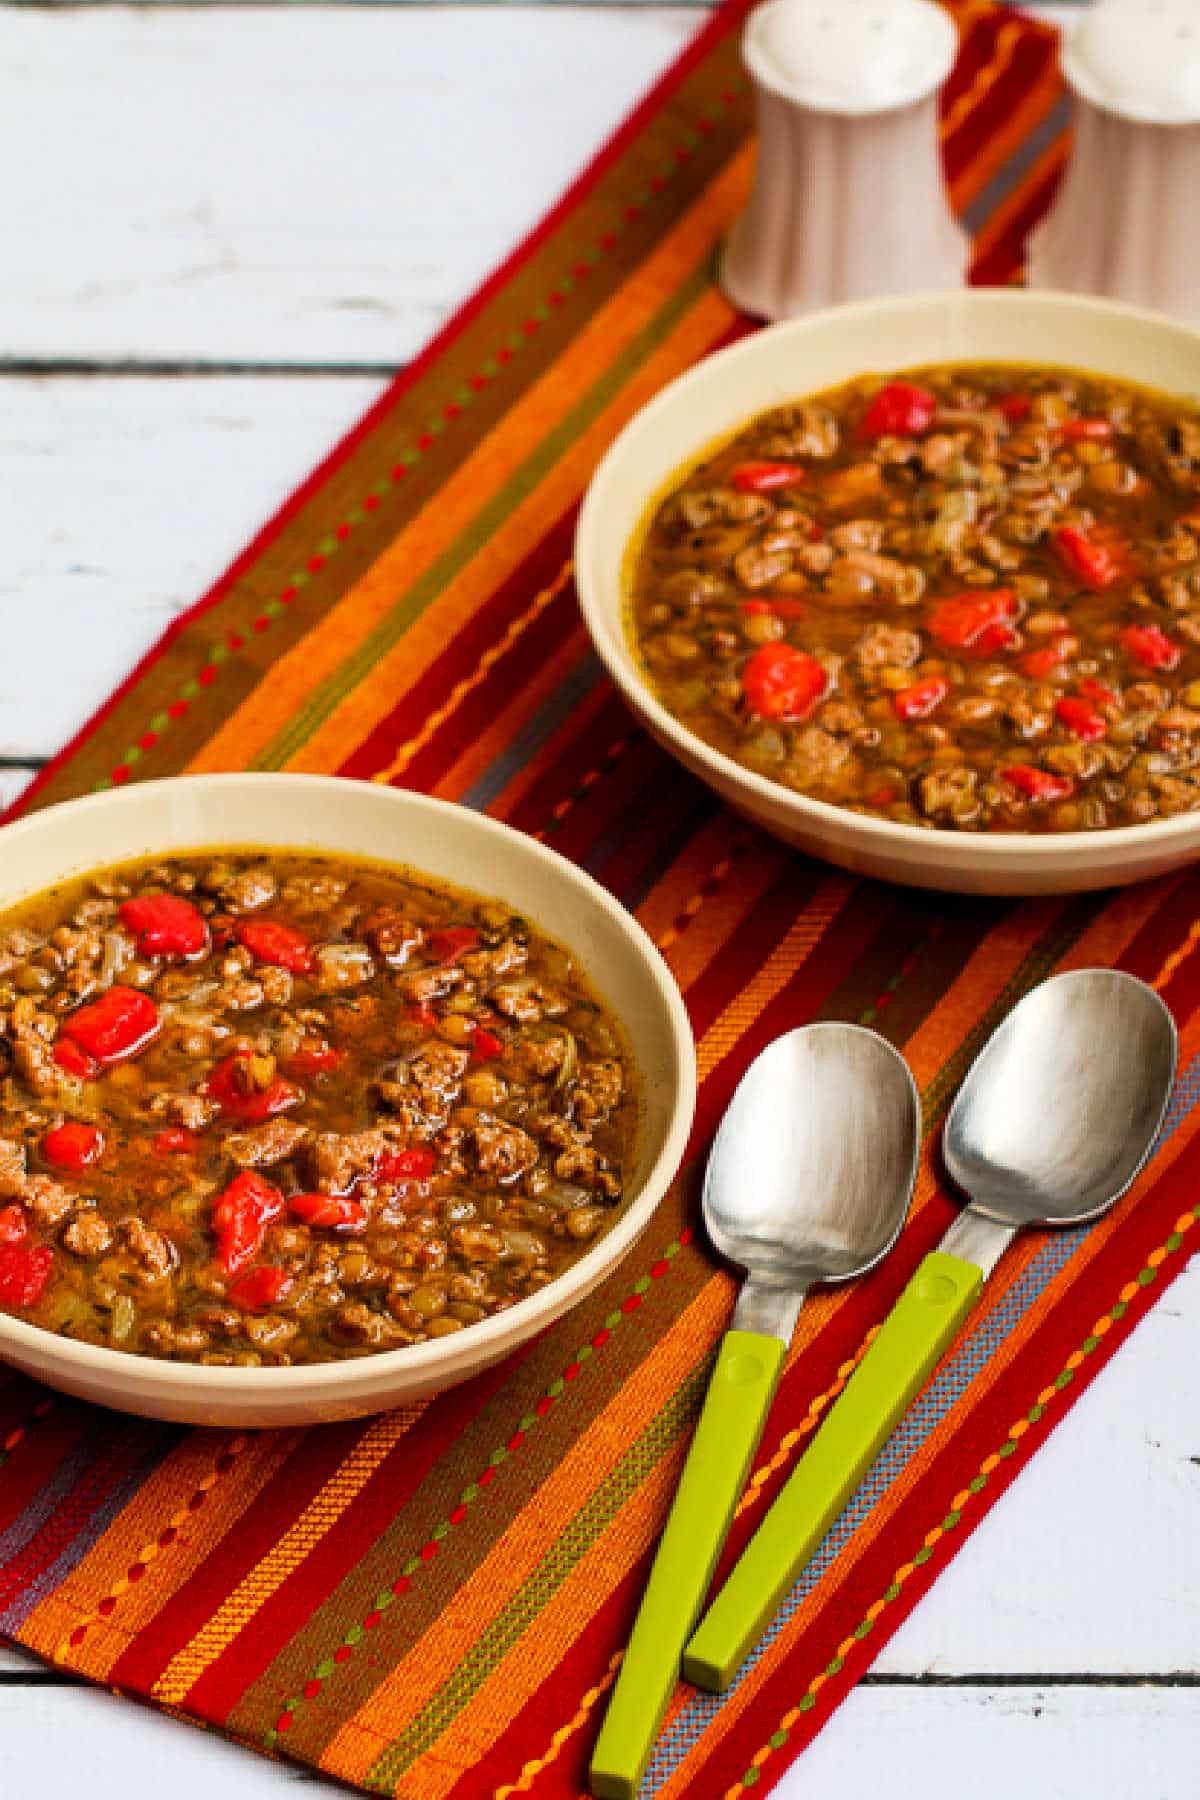 Sausage and Lentil Soup shown in two serving bowls on red napkin